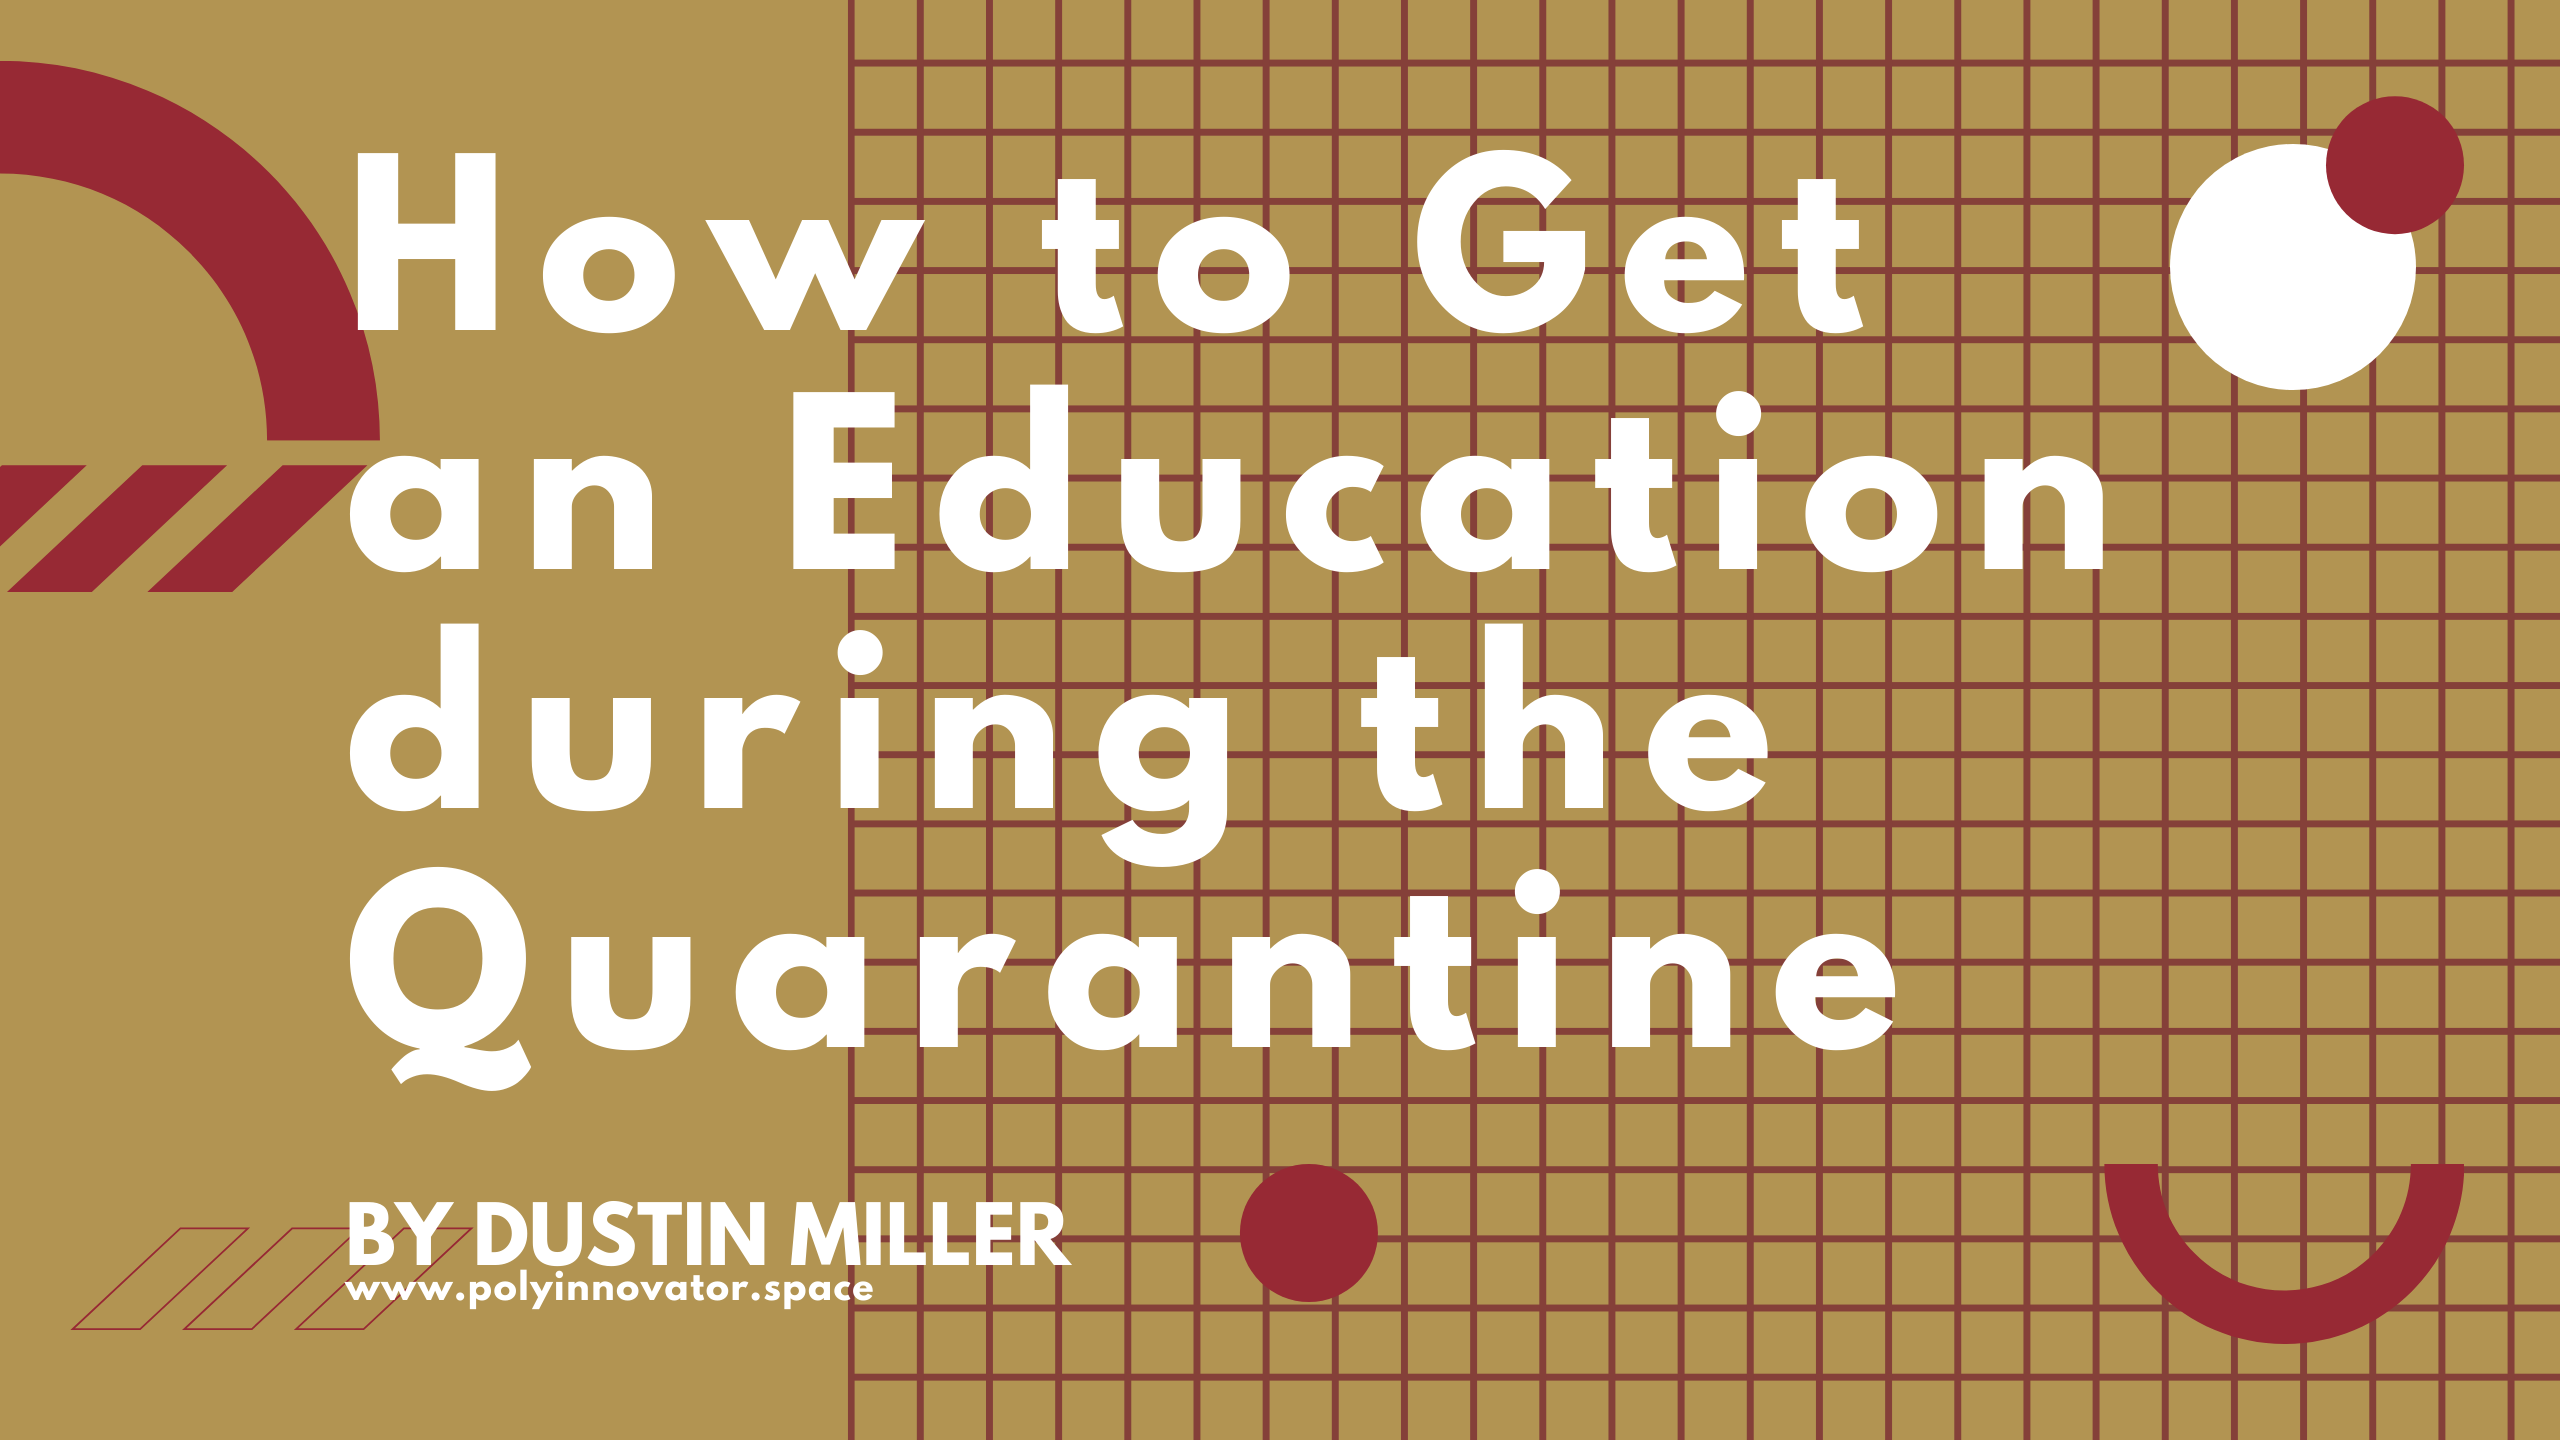 How to Get an Education during the Quarantine